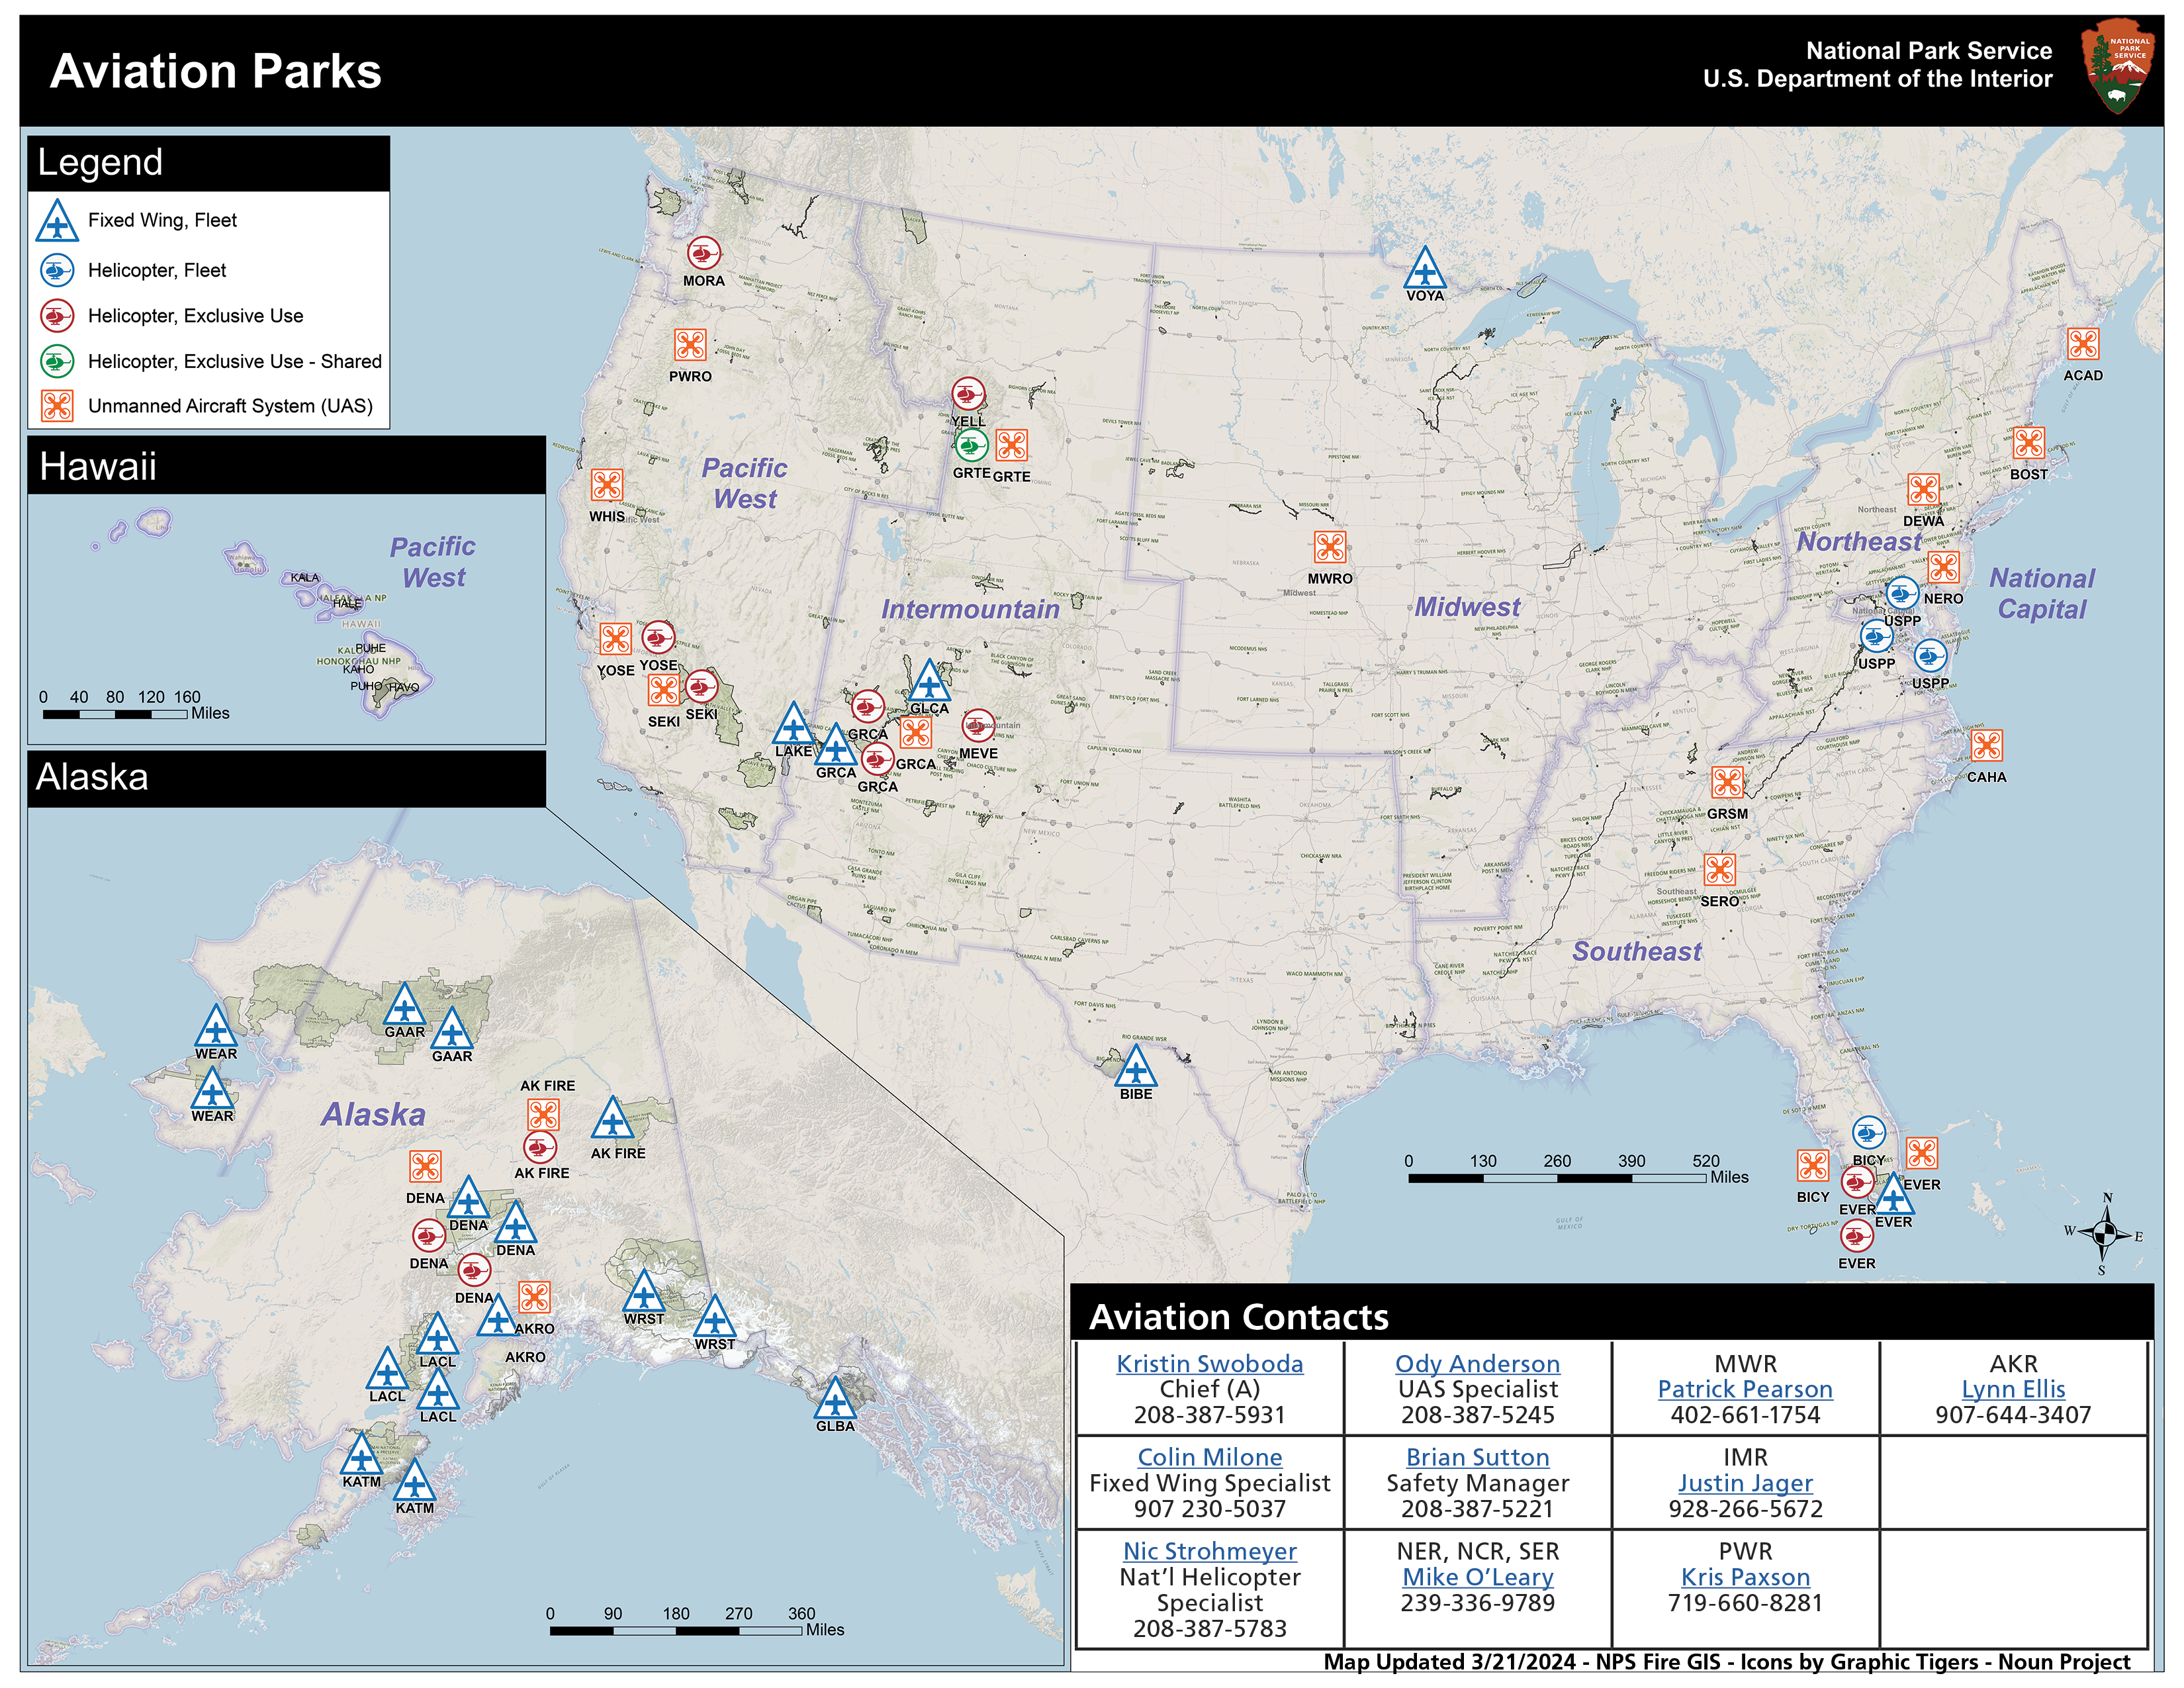 Map of the United States noting locations of National Park Service aviation resources - both government-owned and contracted.